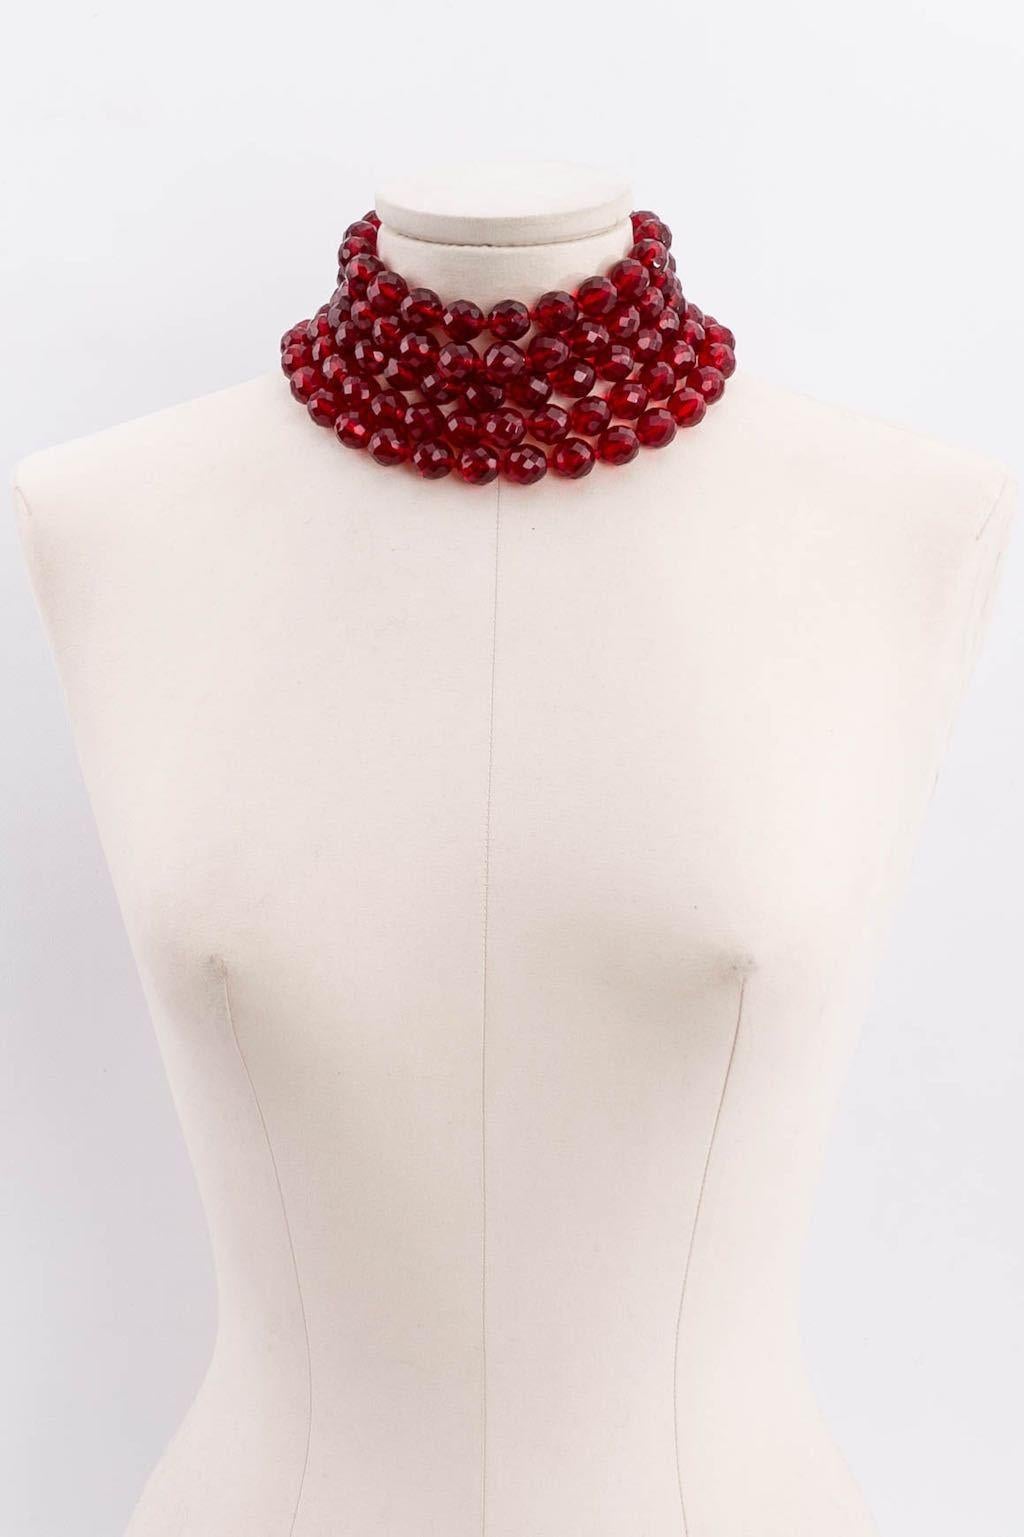 Chanel (Made in France) Gilded metal choker composed of several strands of red facetted beads. 2cc9 Collection.

Additional information: 
Dimensions: Length: 34 cm to 39 cm (13.38